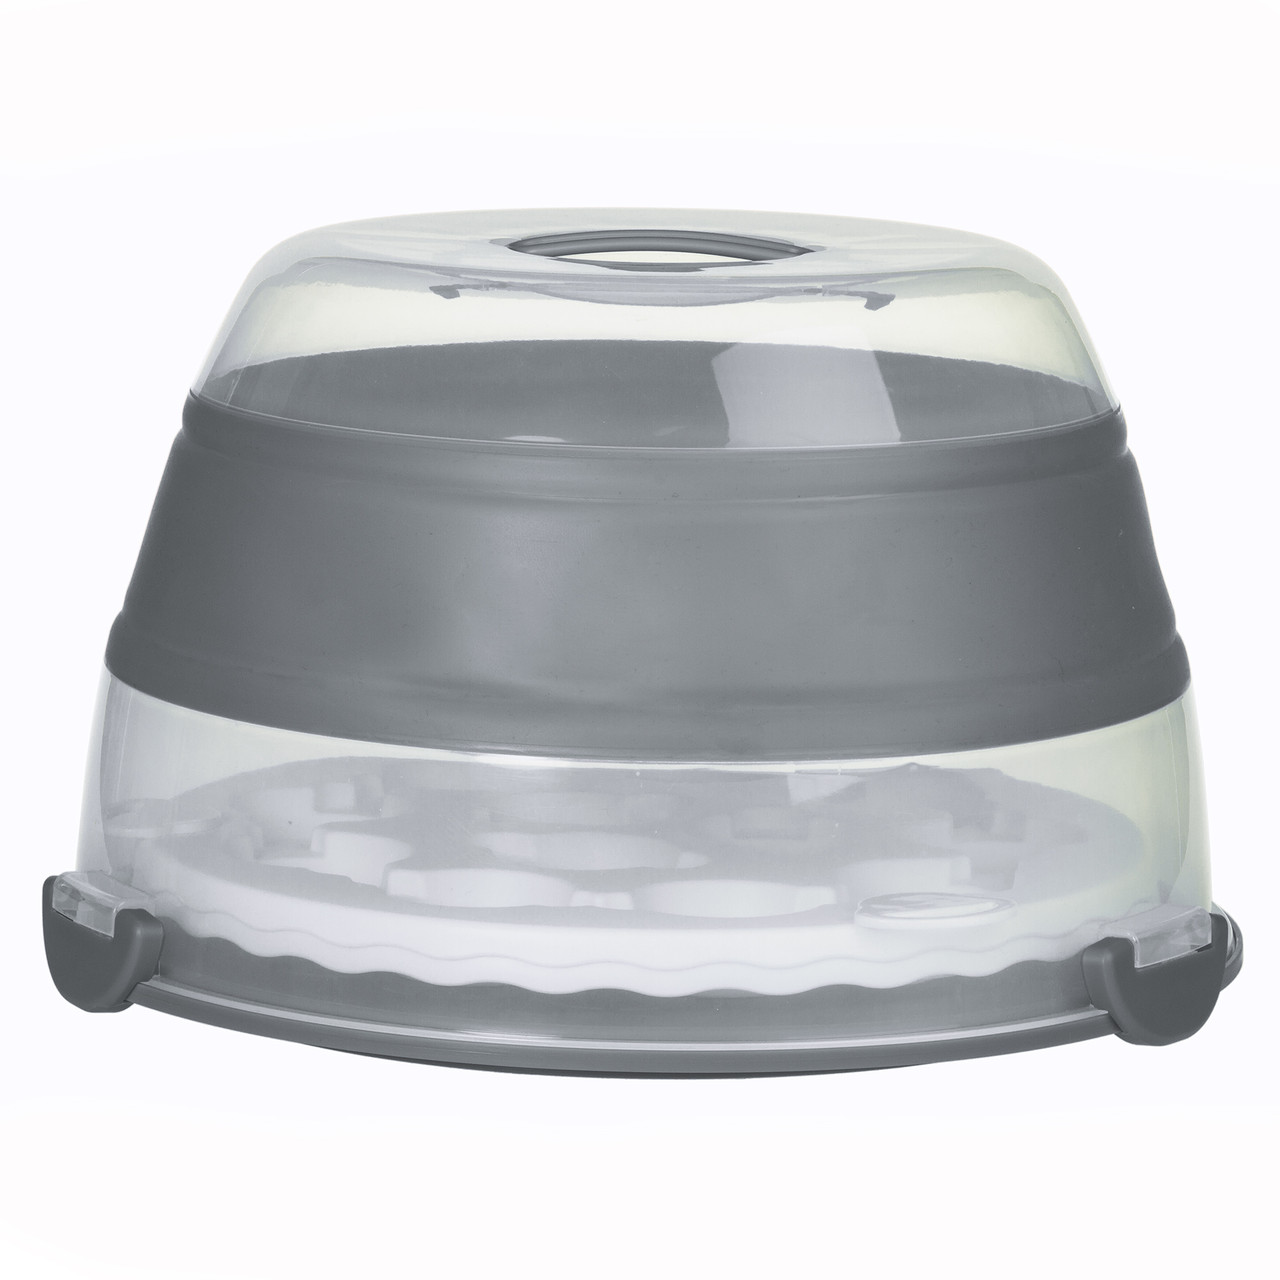 Prepworks Collapsible Cupcake Carrier, Gray